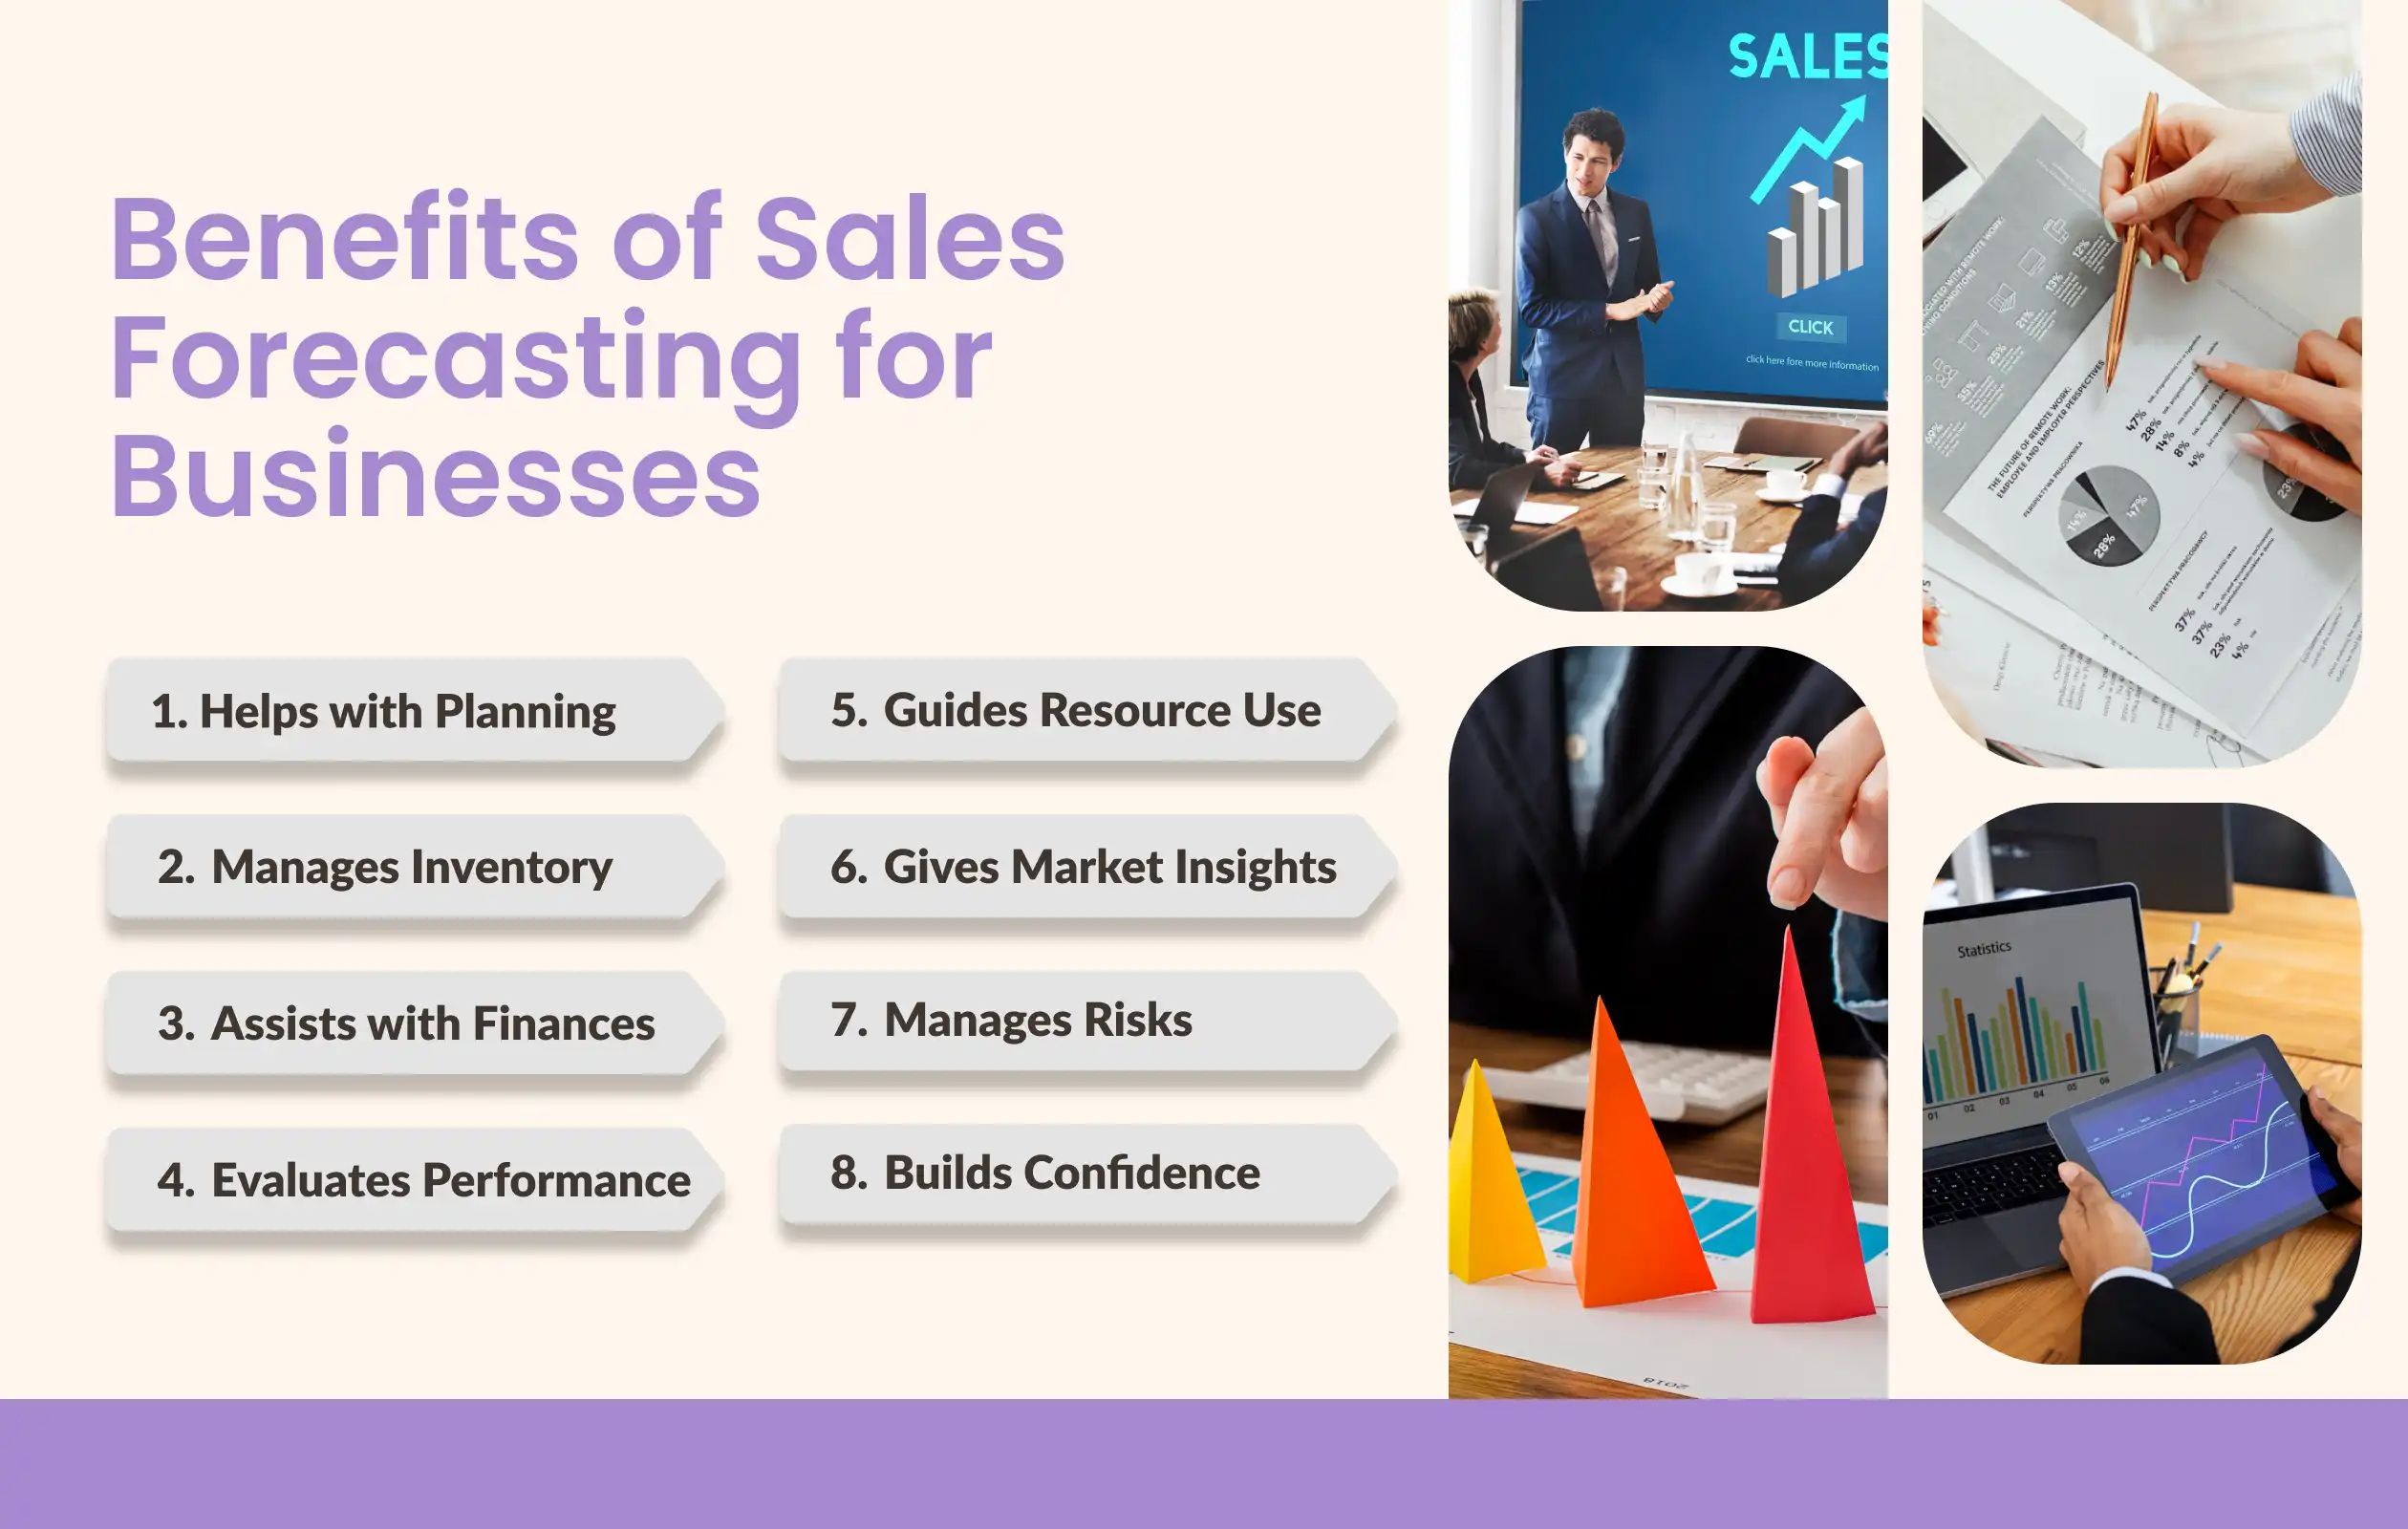 Benefits of Sales Forecasting